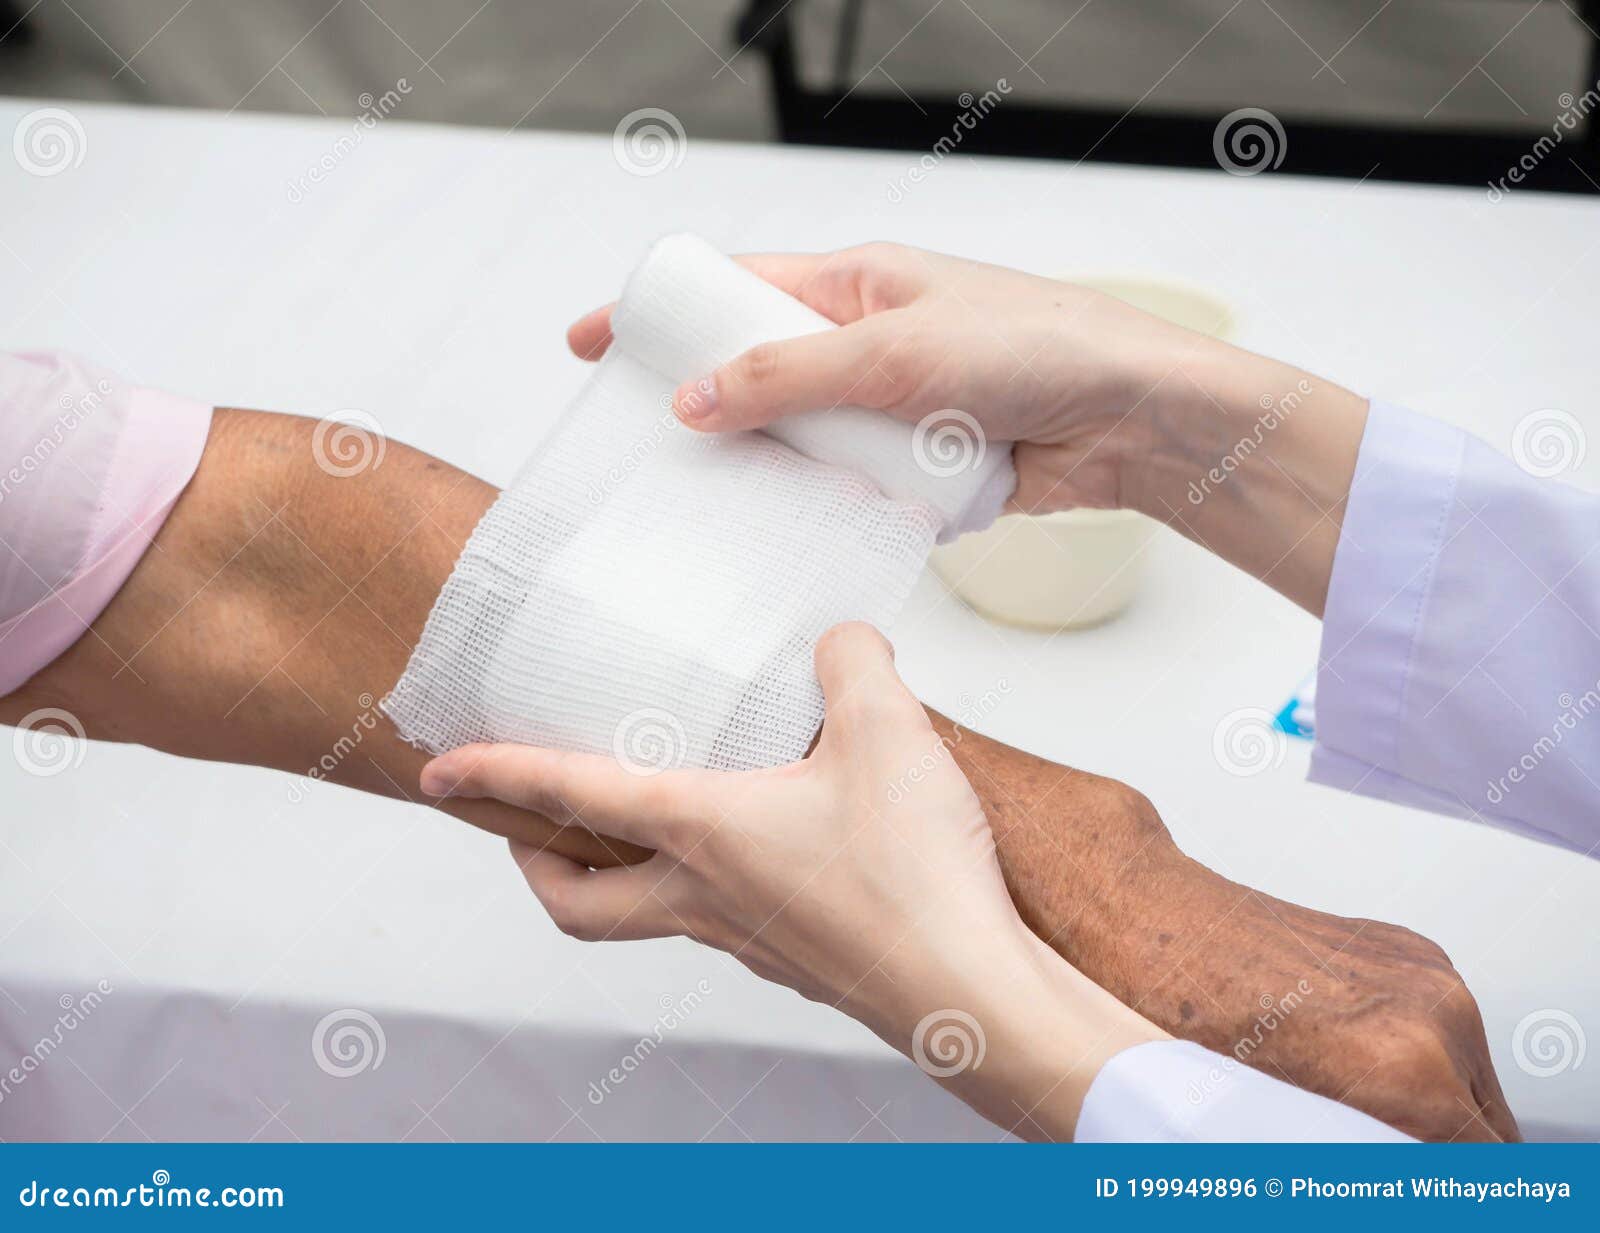 closeup wound dressing an elderly person. doctor suing bandage covering on senior womanÃ¢â¬â¢s arm at home, wearing glove to protect